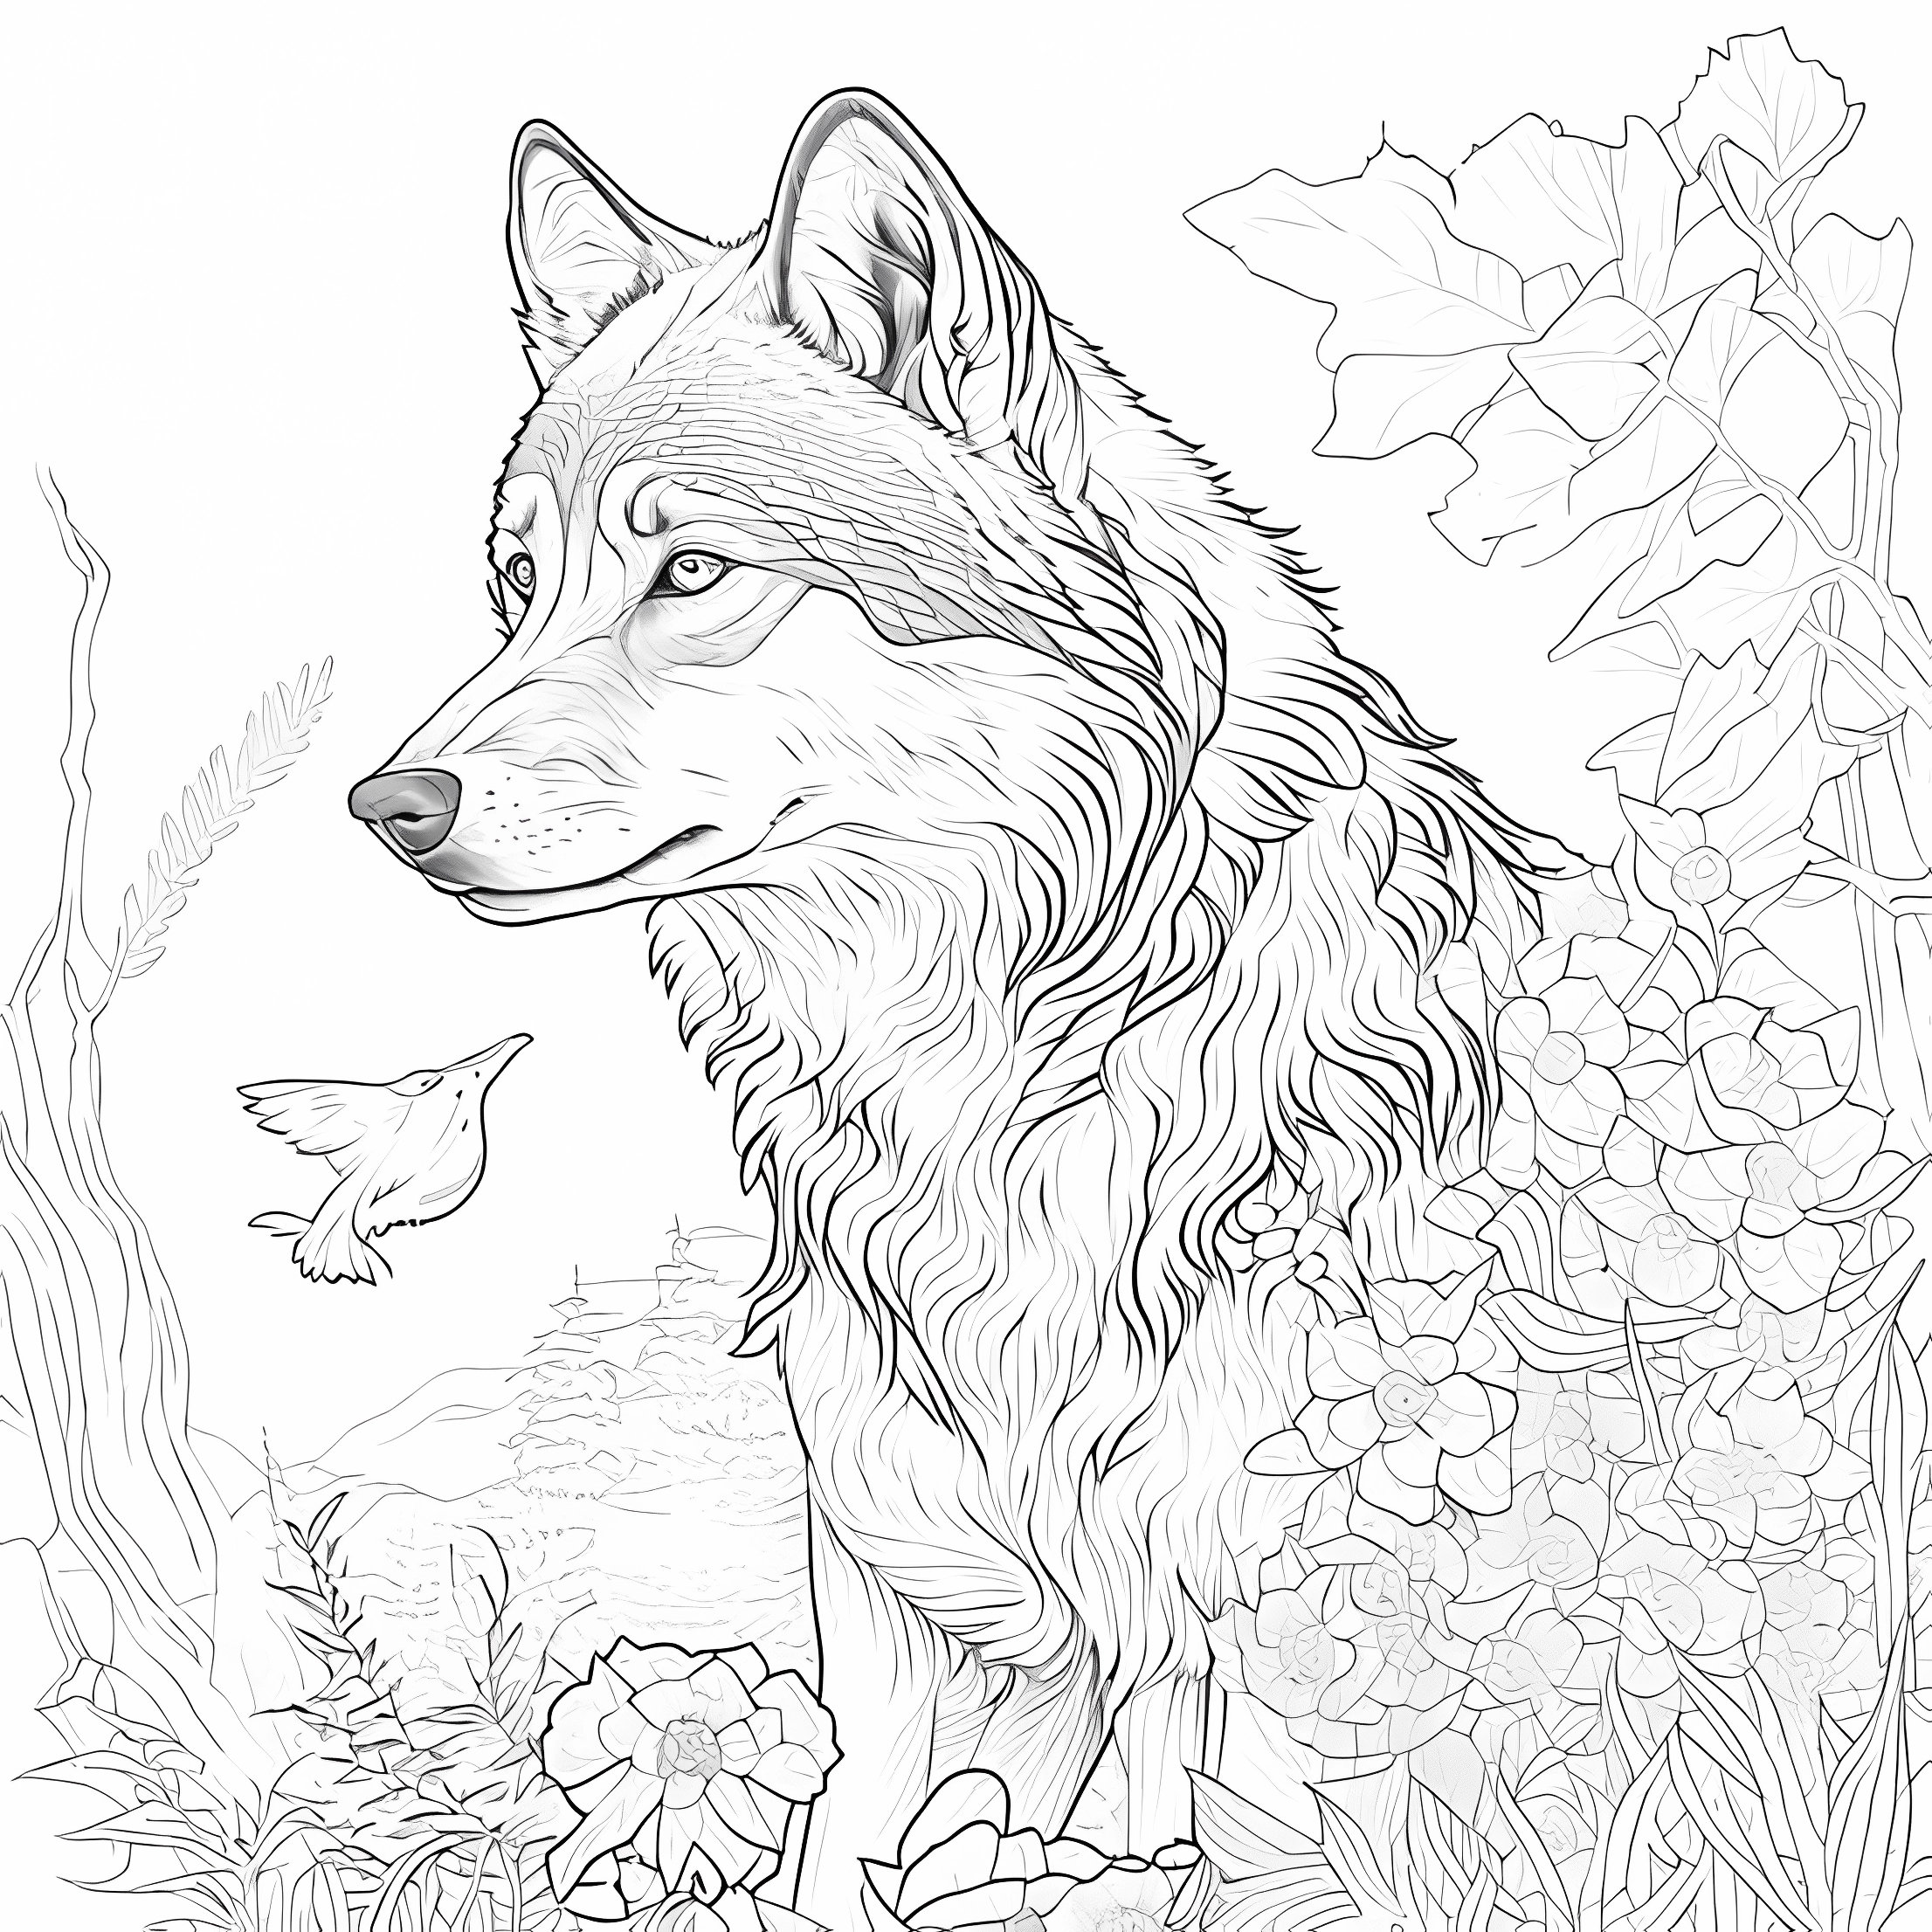 Wolf coloring pages for teens adults printable pdf pages a realistic grayscale illustrations